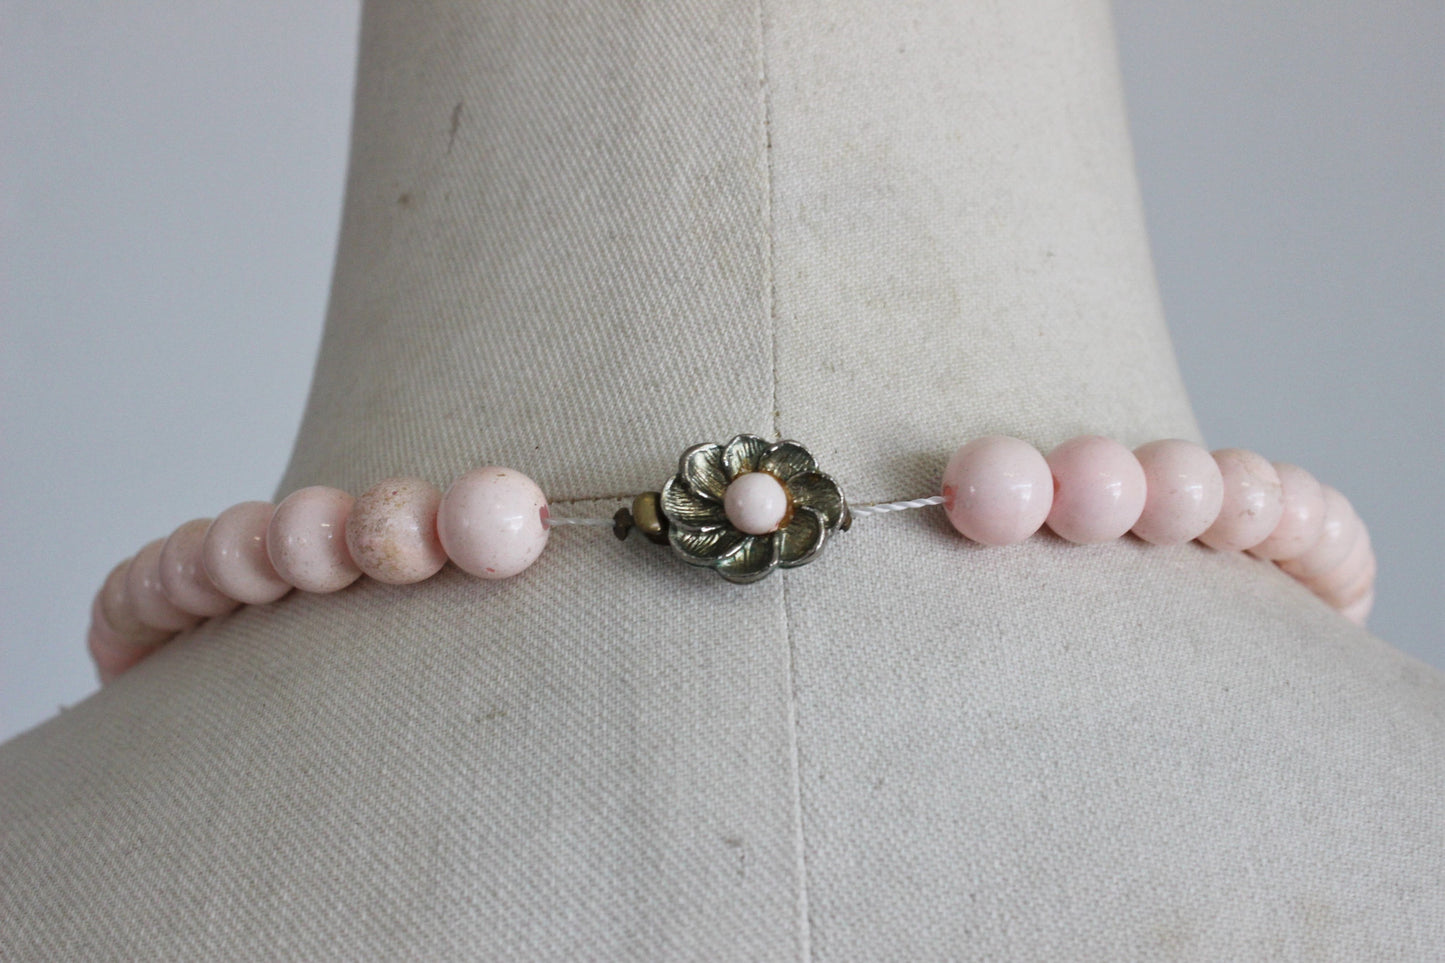 Vintage 1950s Pink Bead Necklace